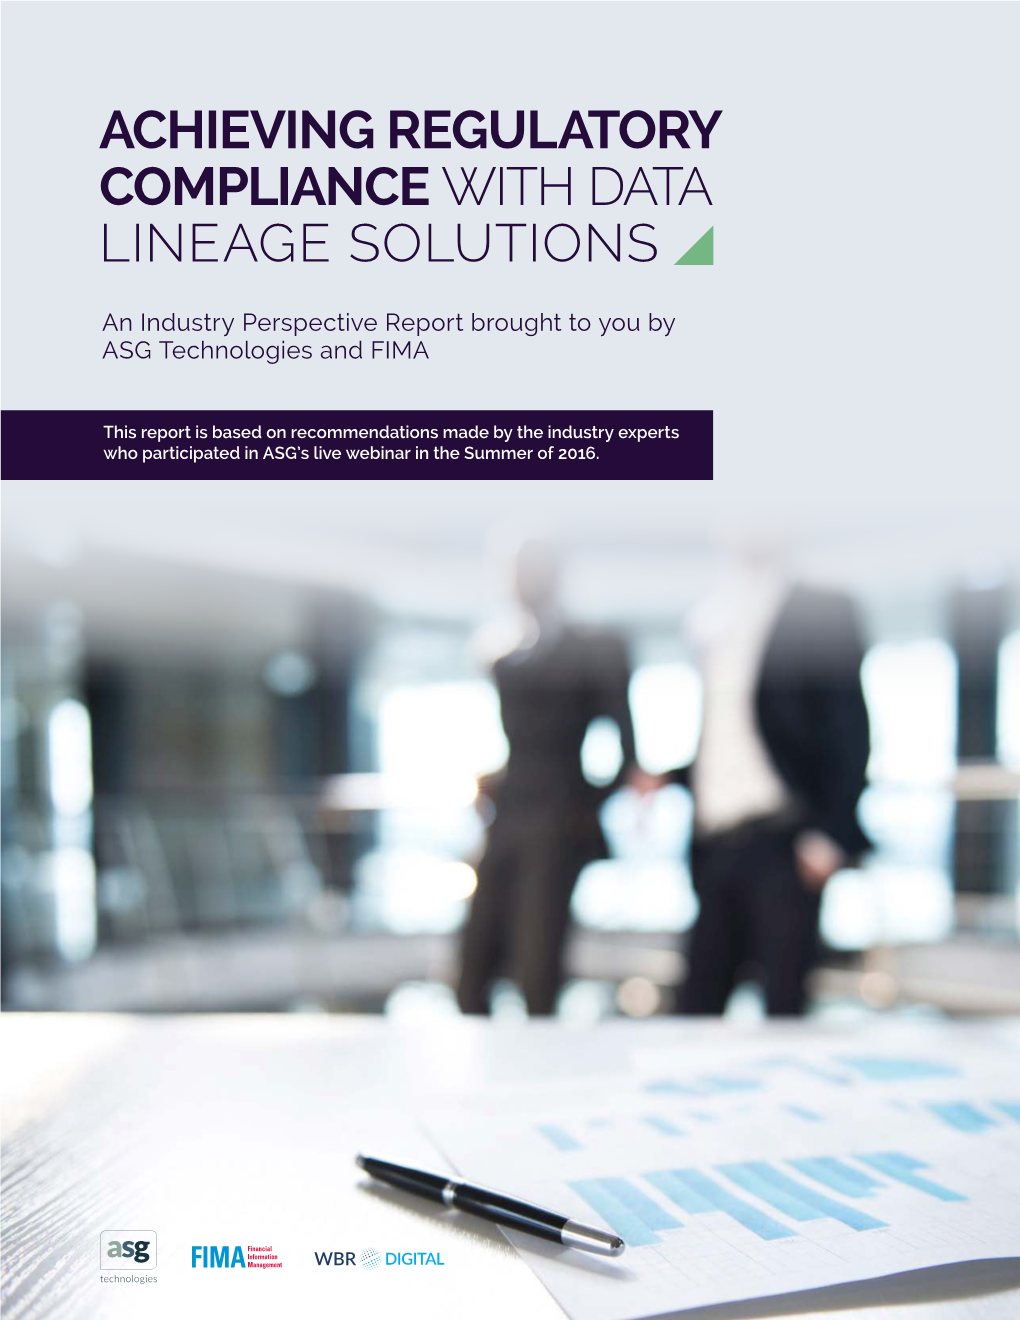 Achieving Regulatory Compliance with Data Lineage Solutions